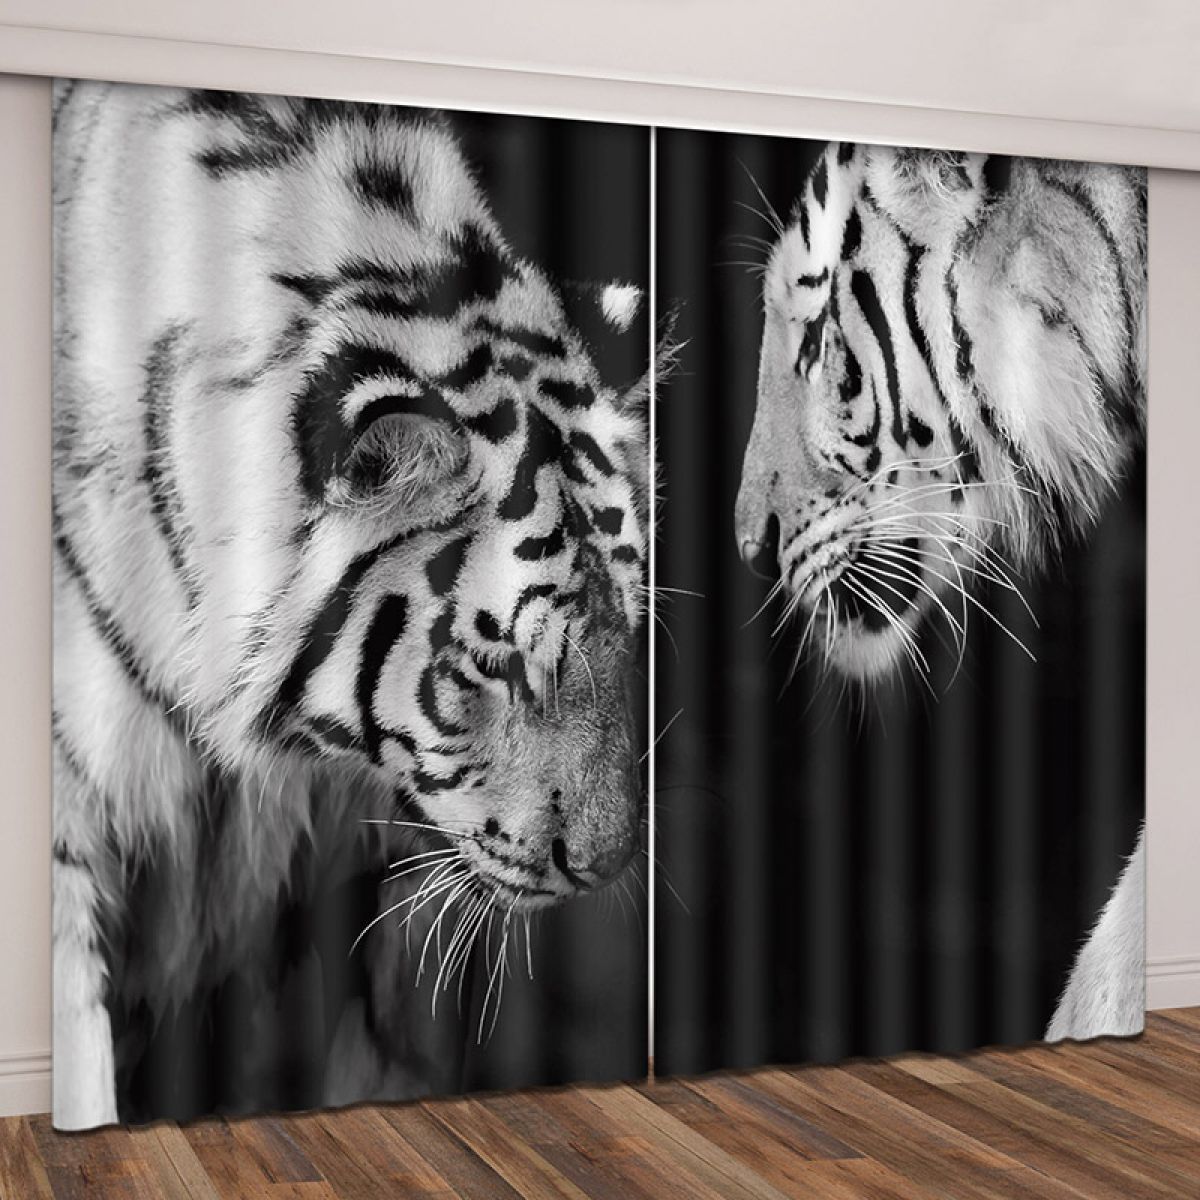 Tiger Couple Black And White Printed Window Curtain Home Decor